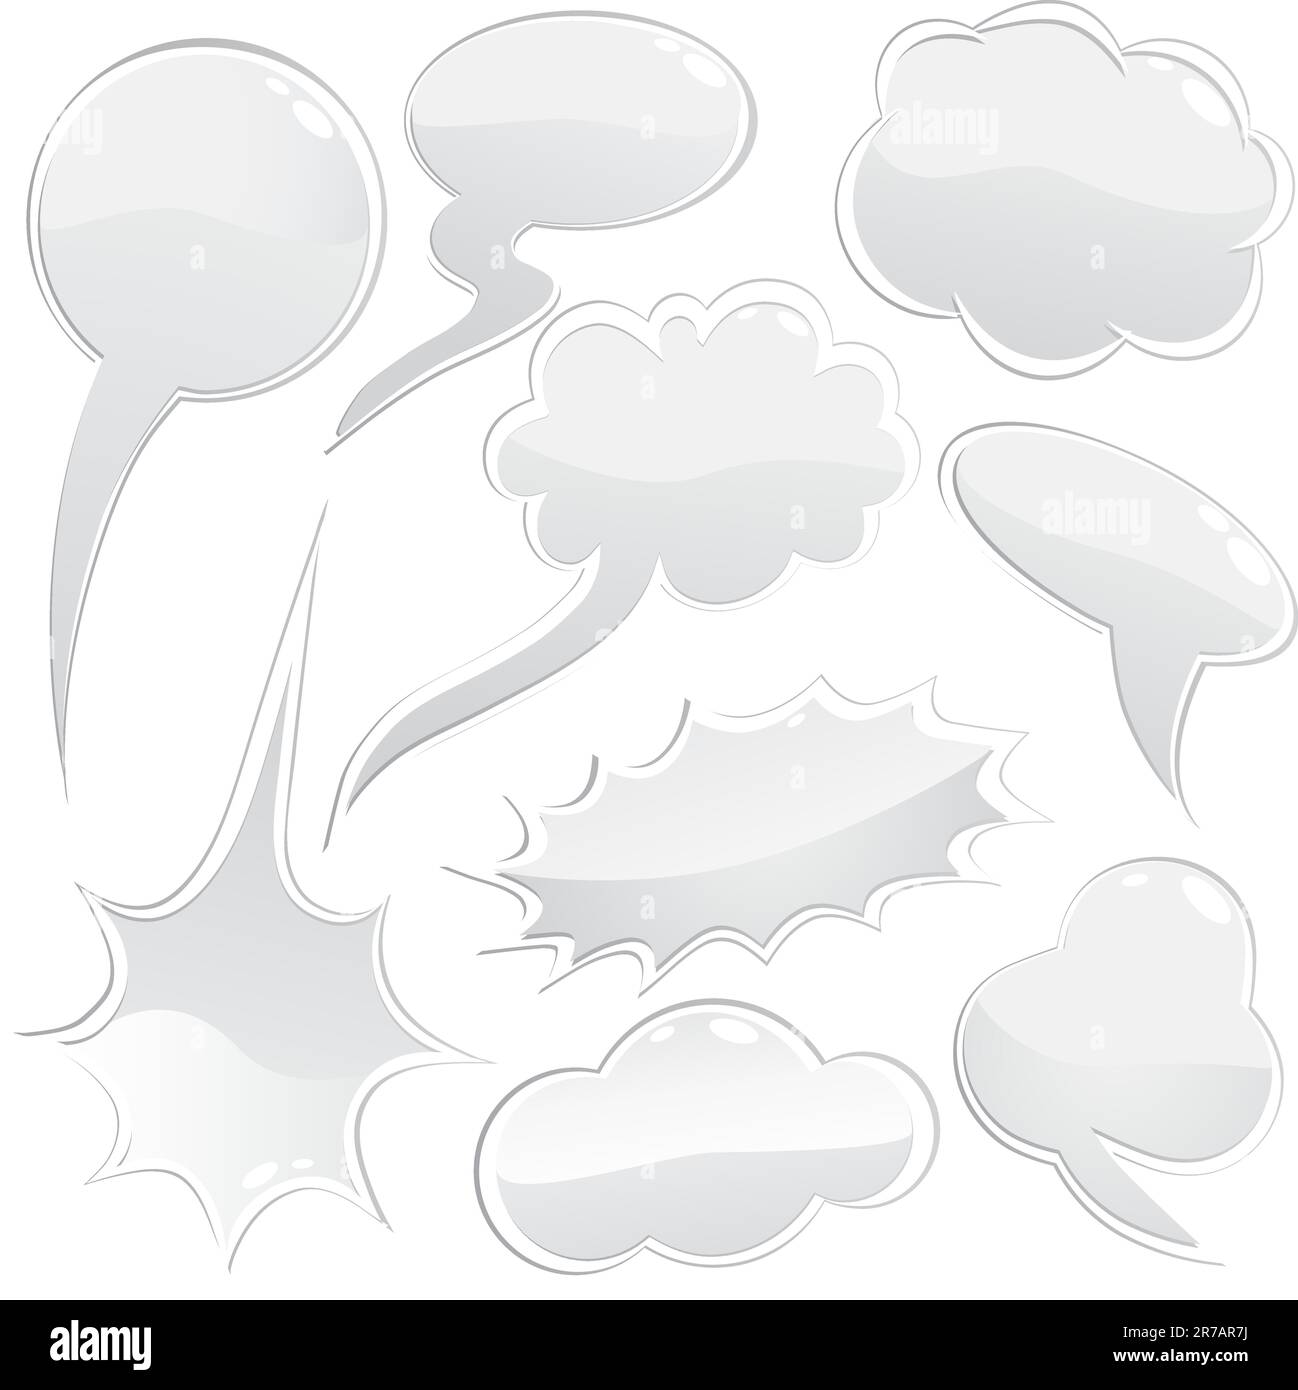 Set of speech and thought bubbles, element for design, vector illustration Stock Vector